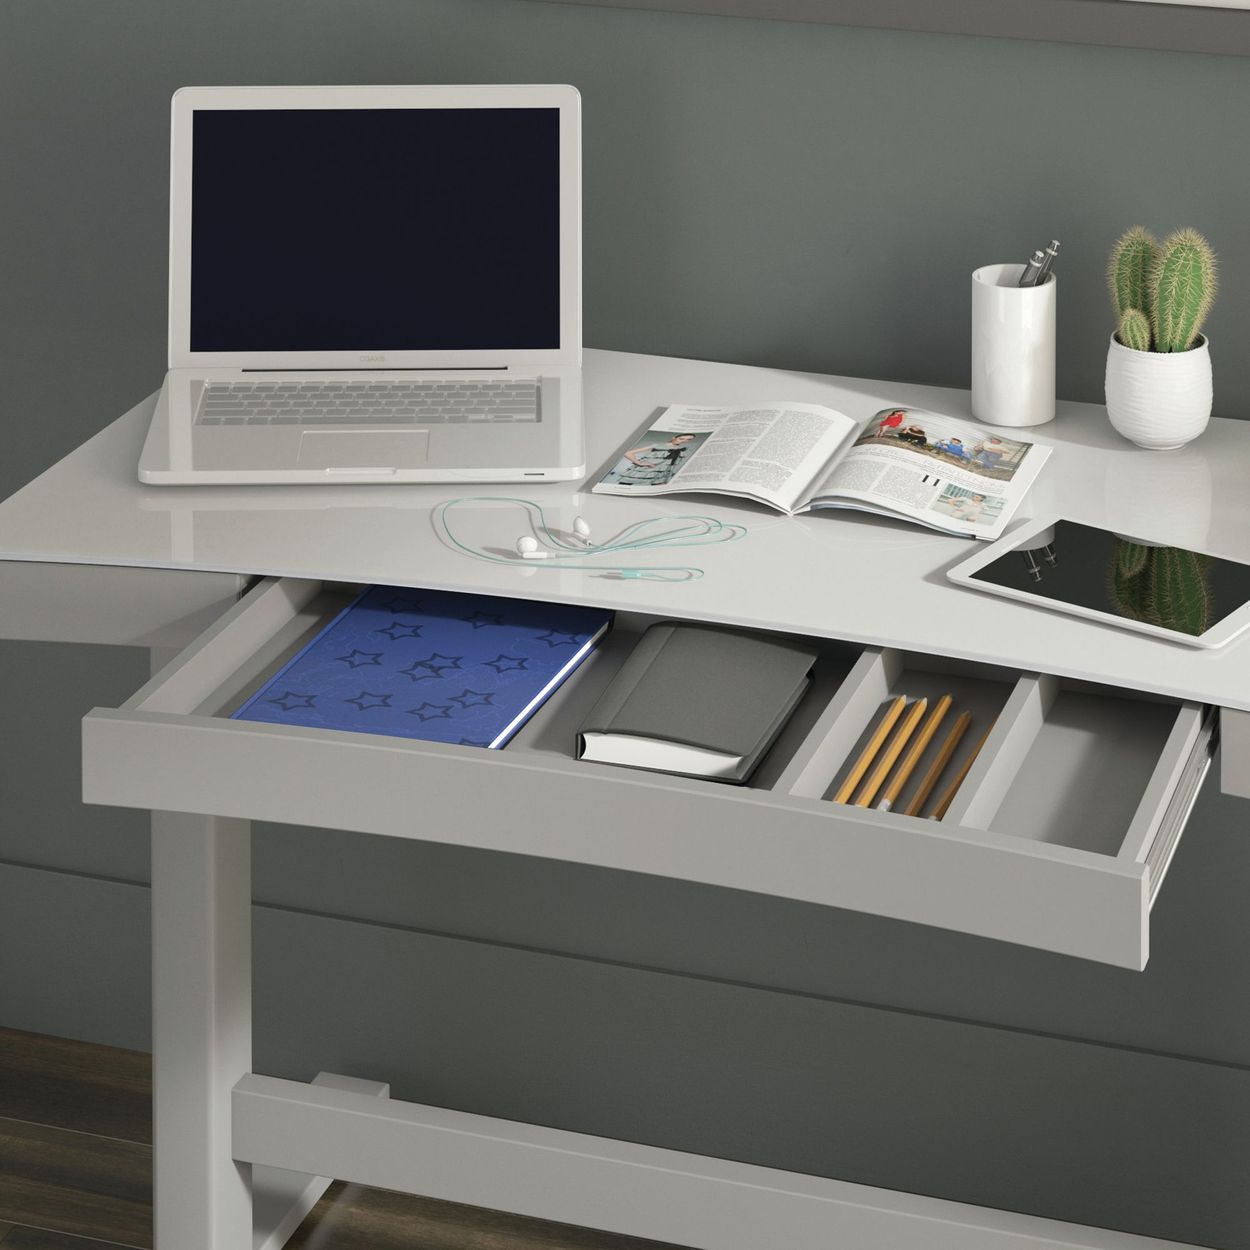 Laptop and office stuffs on the product